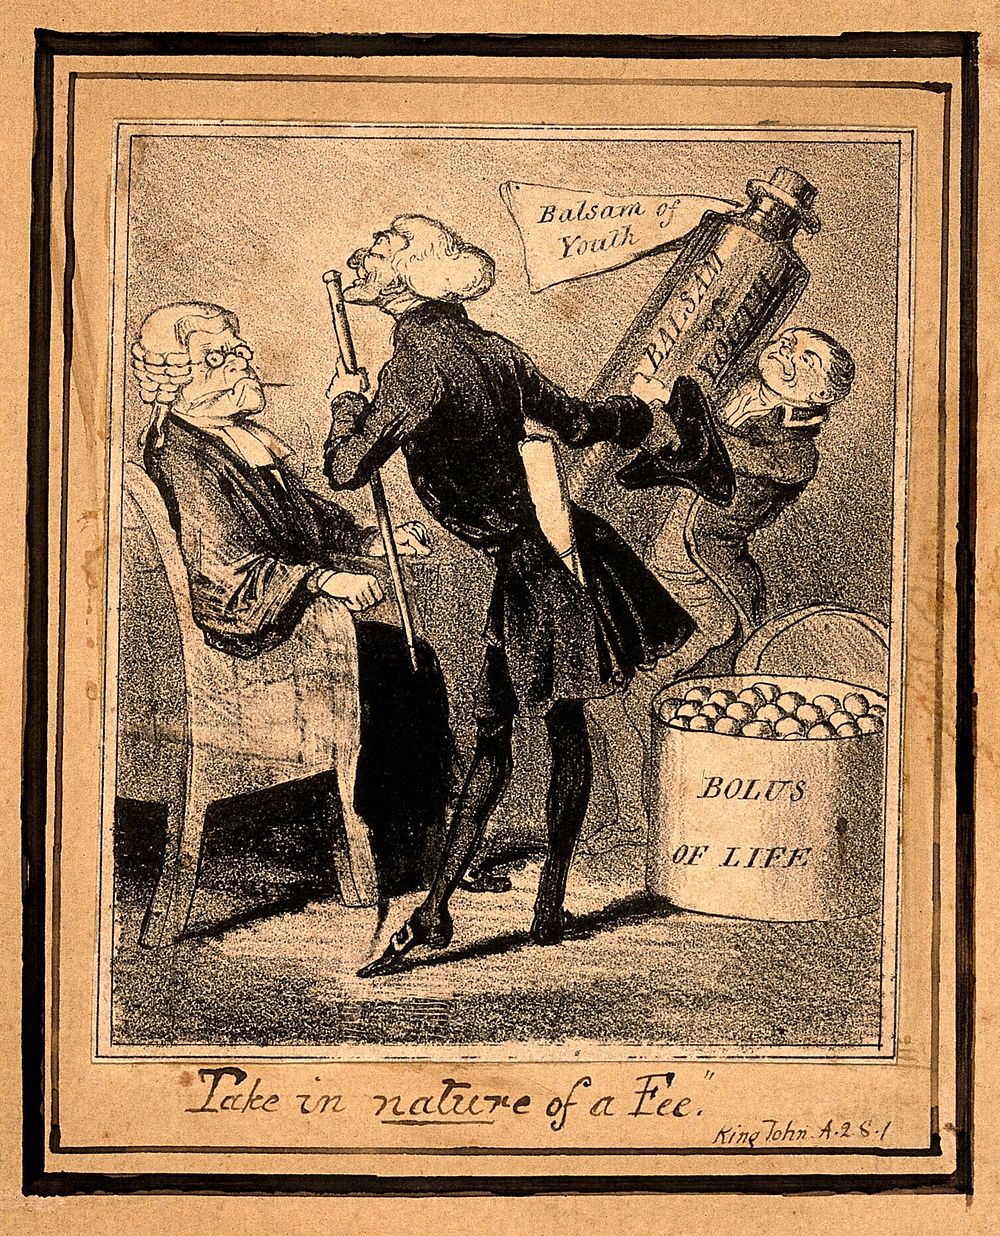 A doctor trying to sell youthfulness potions to an elderly lawyer. Lithograph.